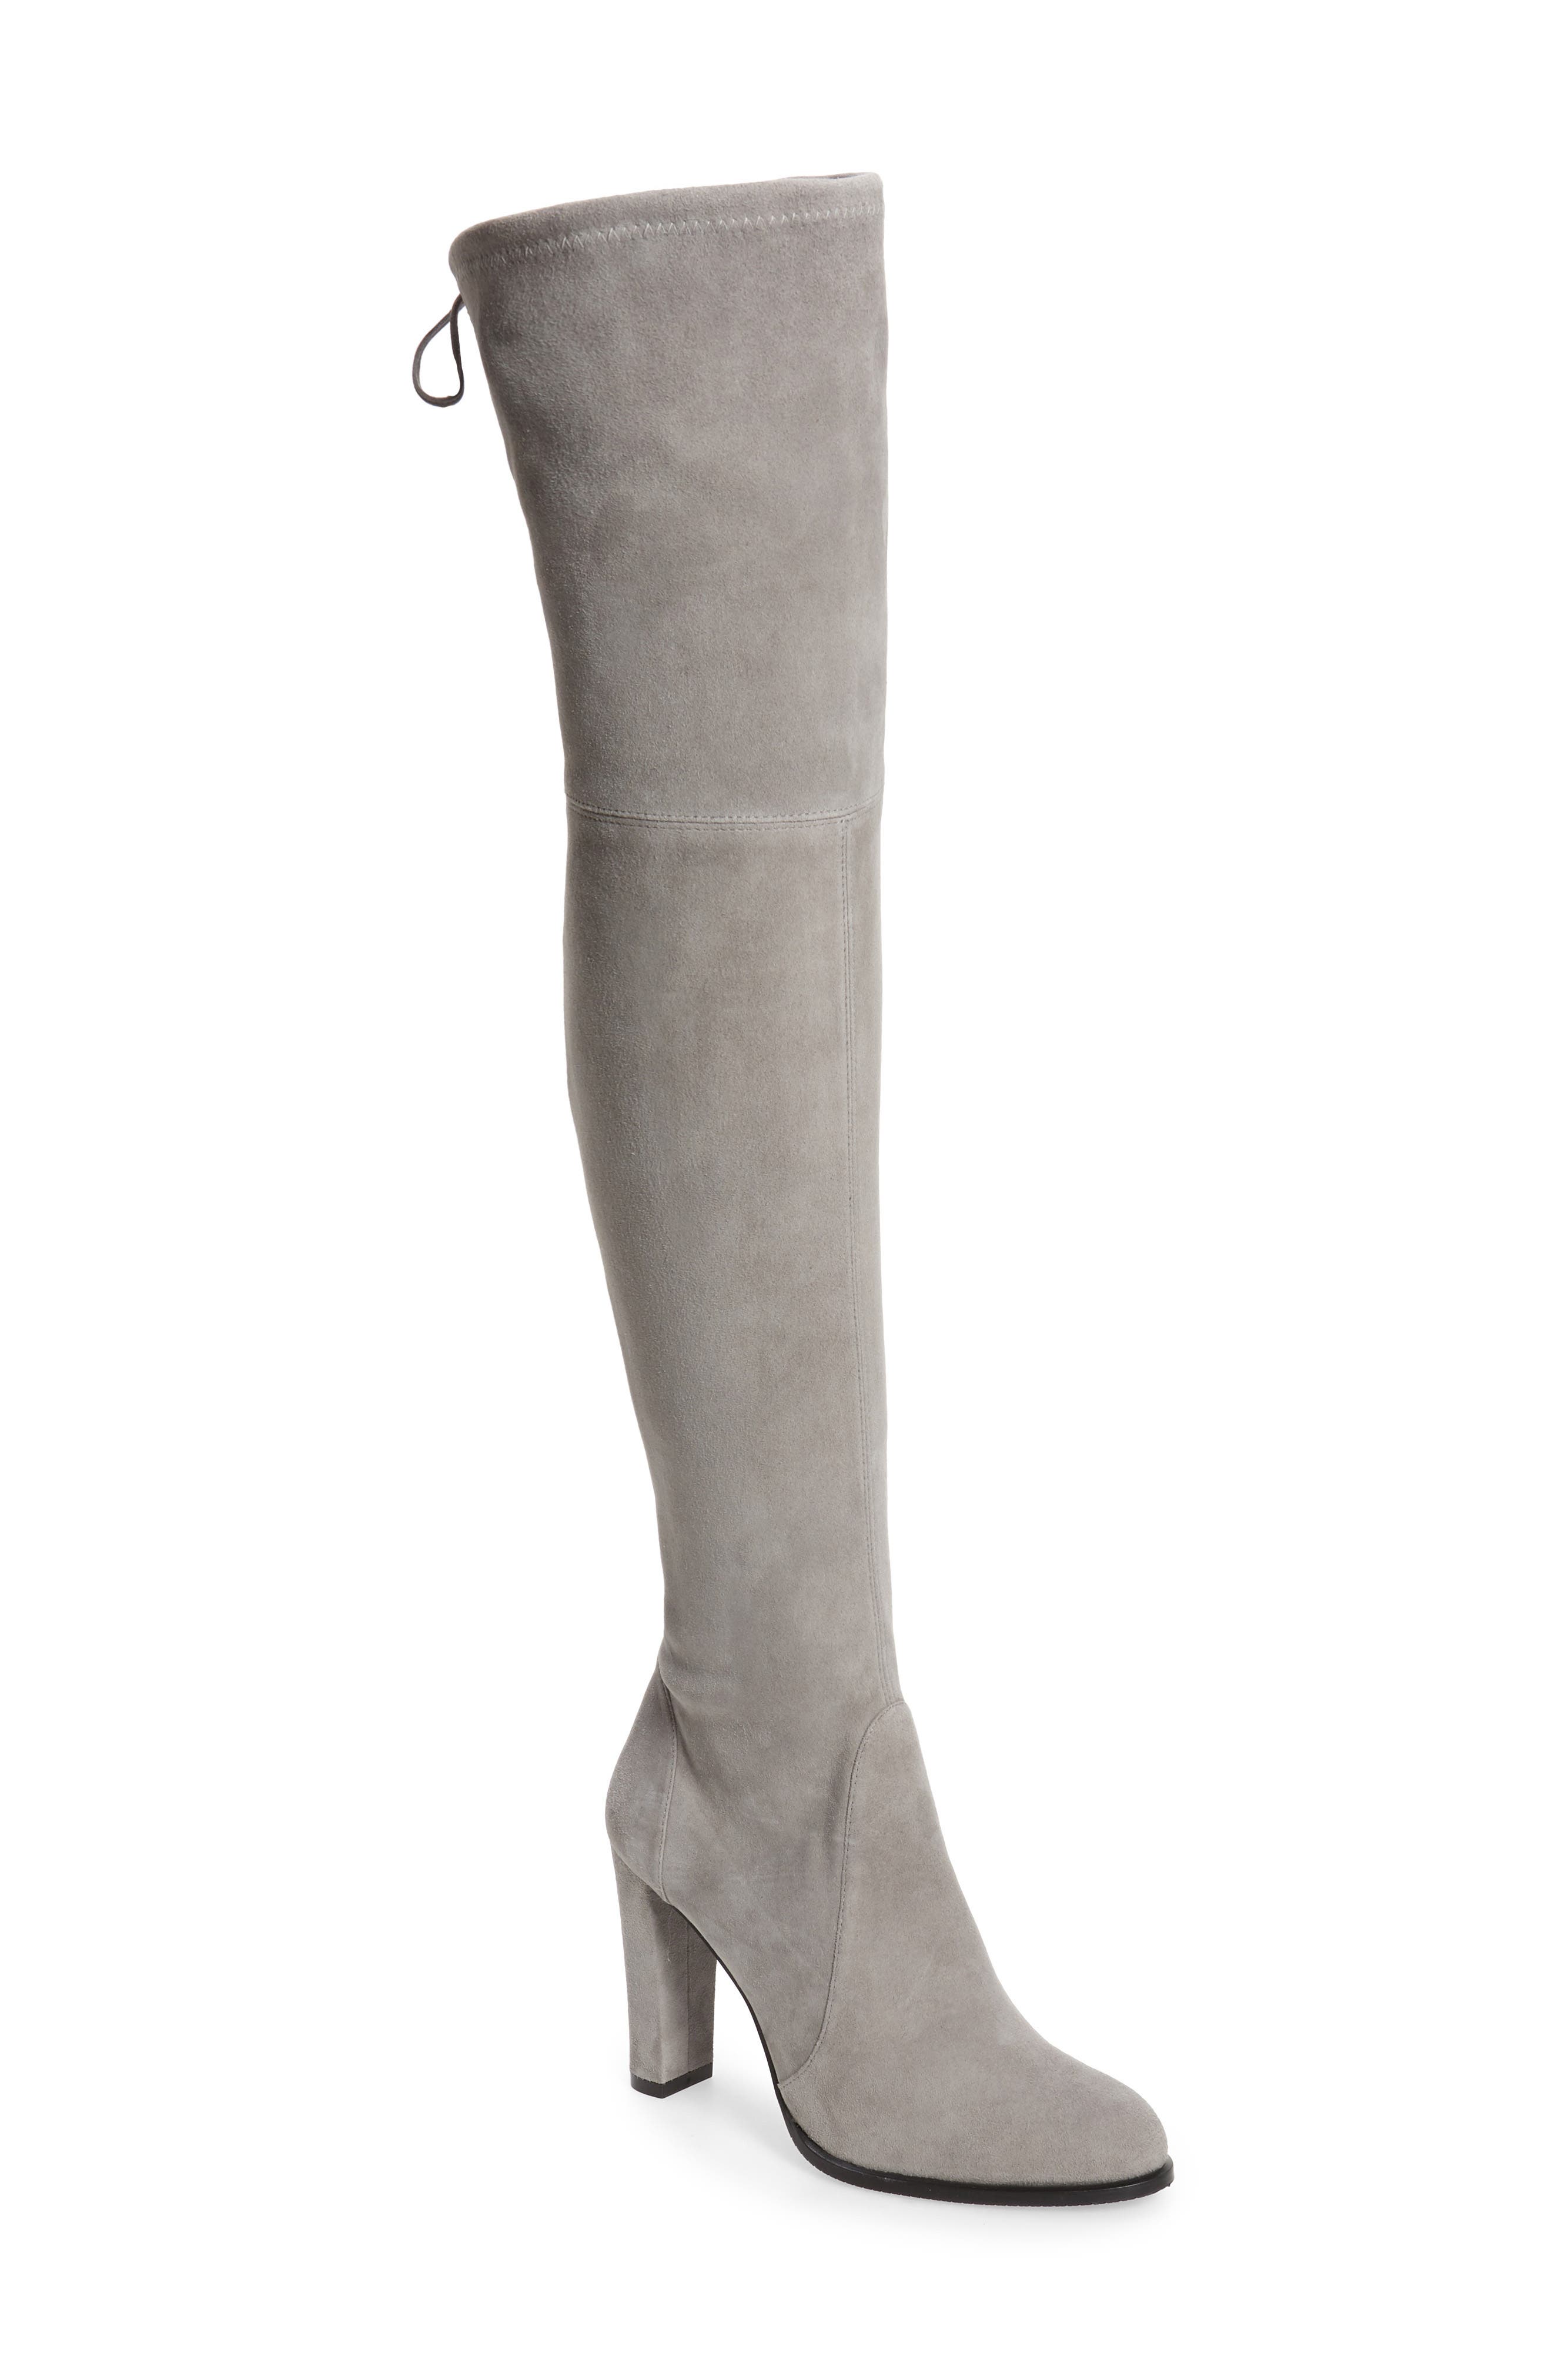 gray over the knee suede boots